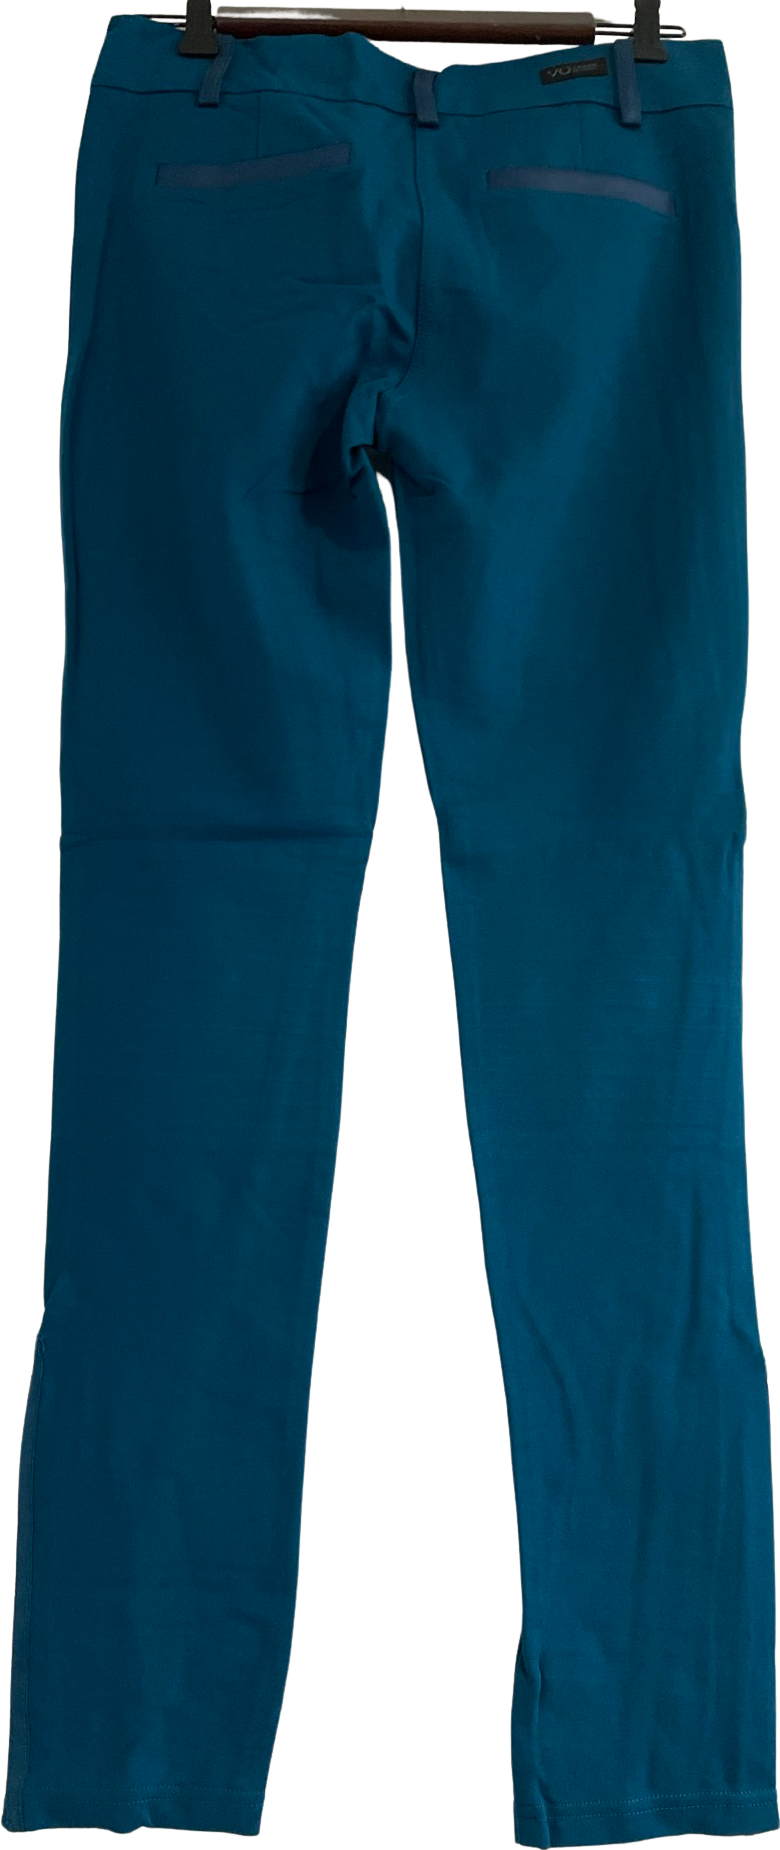 Women's Teal Ponte Pants With Pu / Zippers